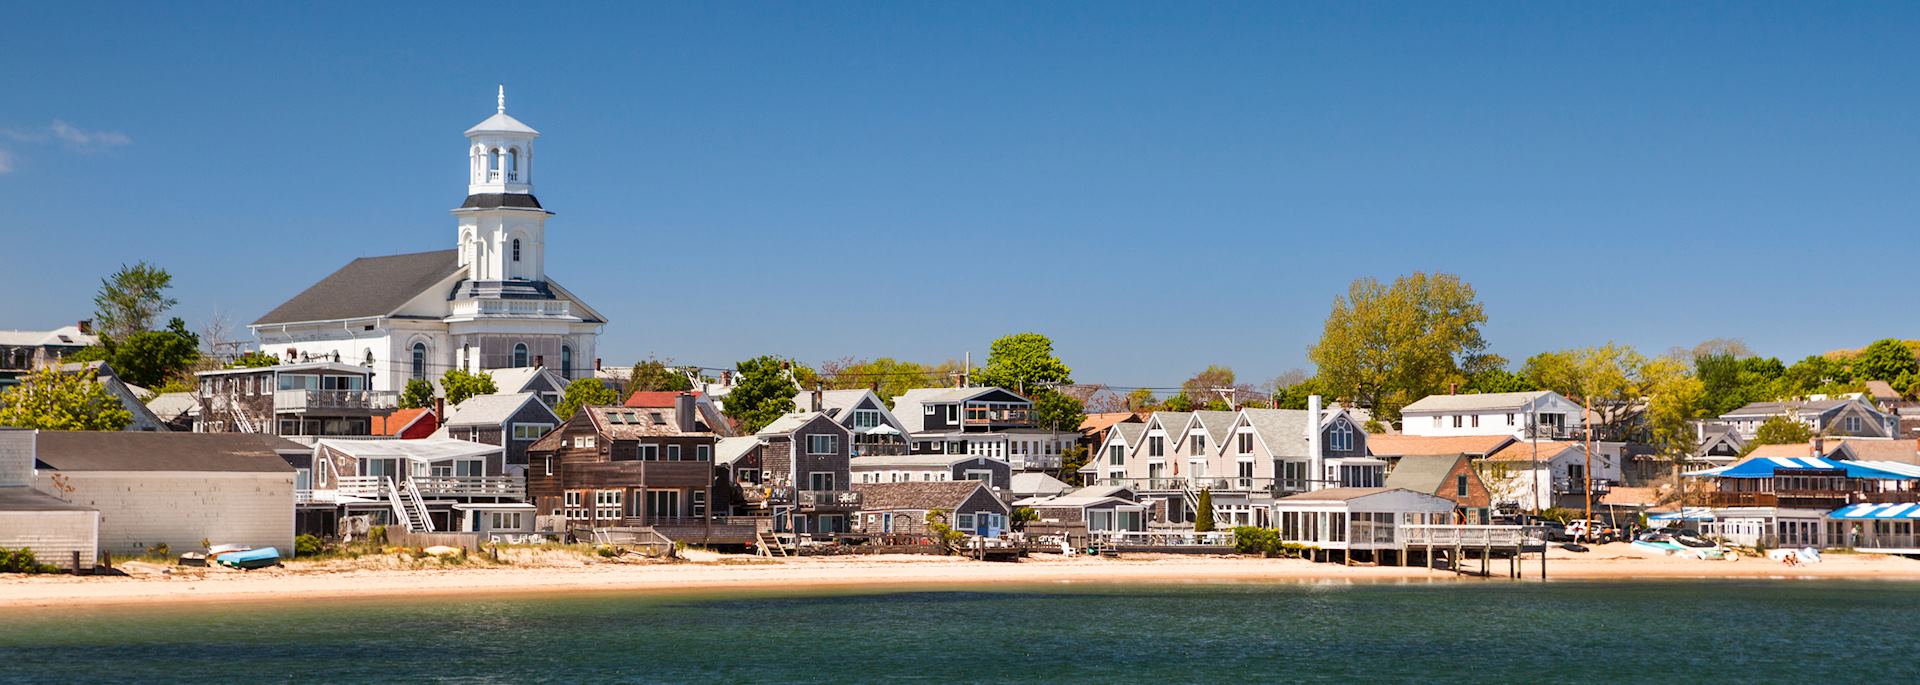 Provincetown waterfront